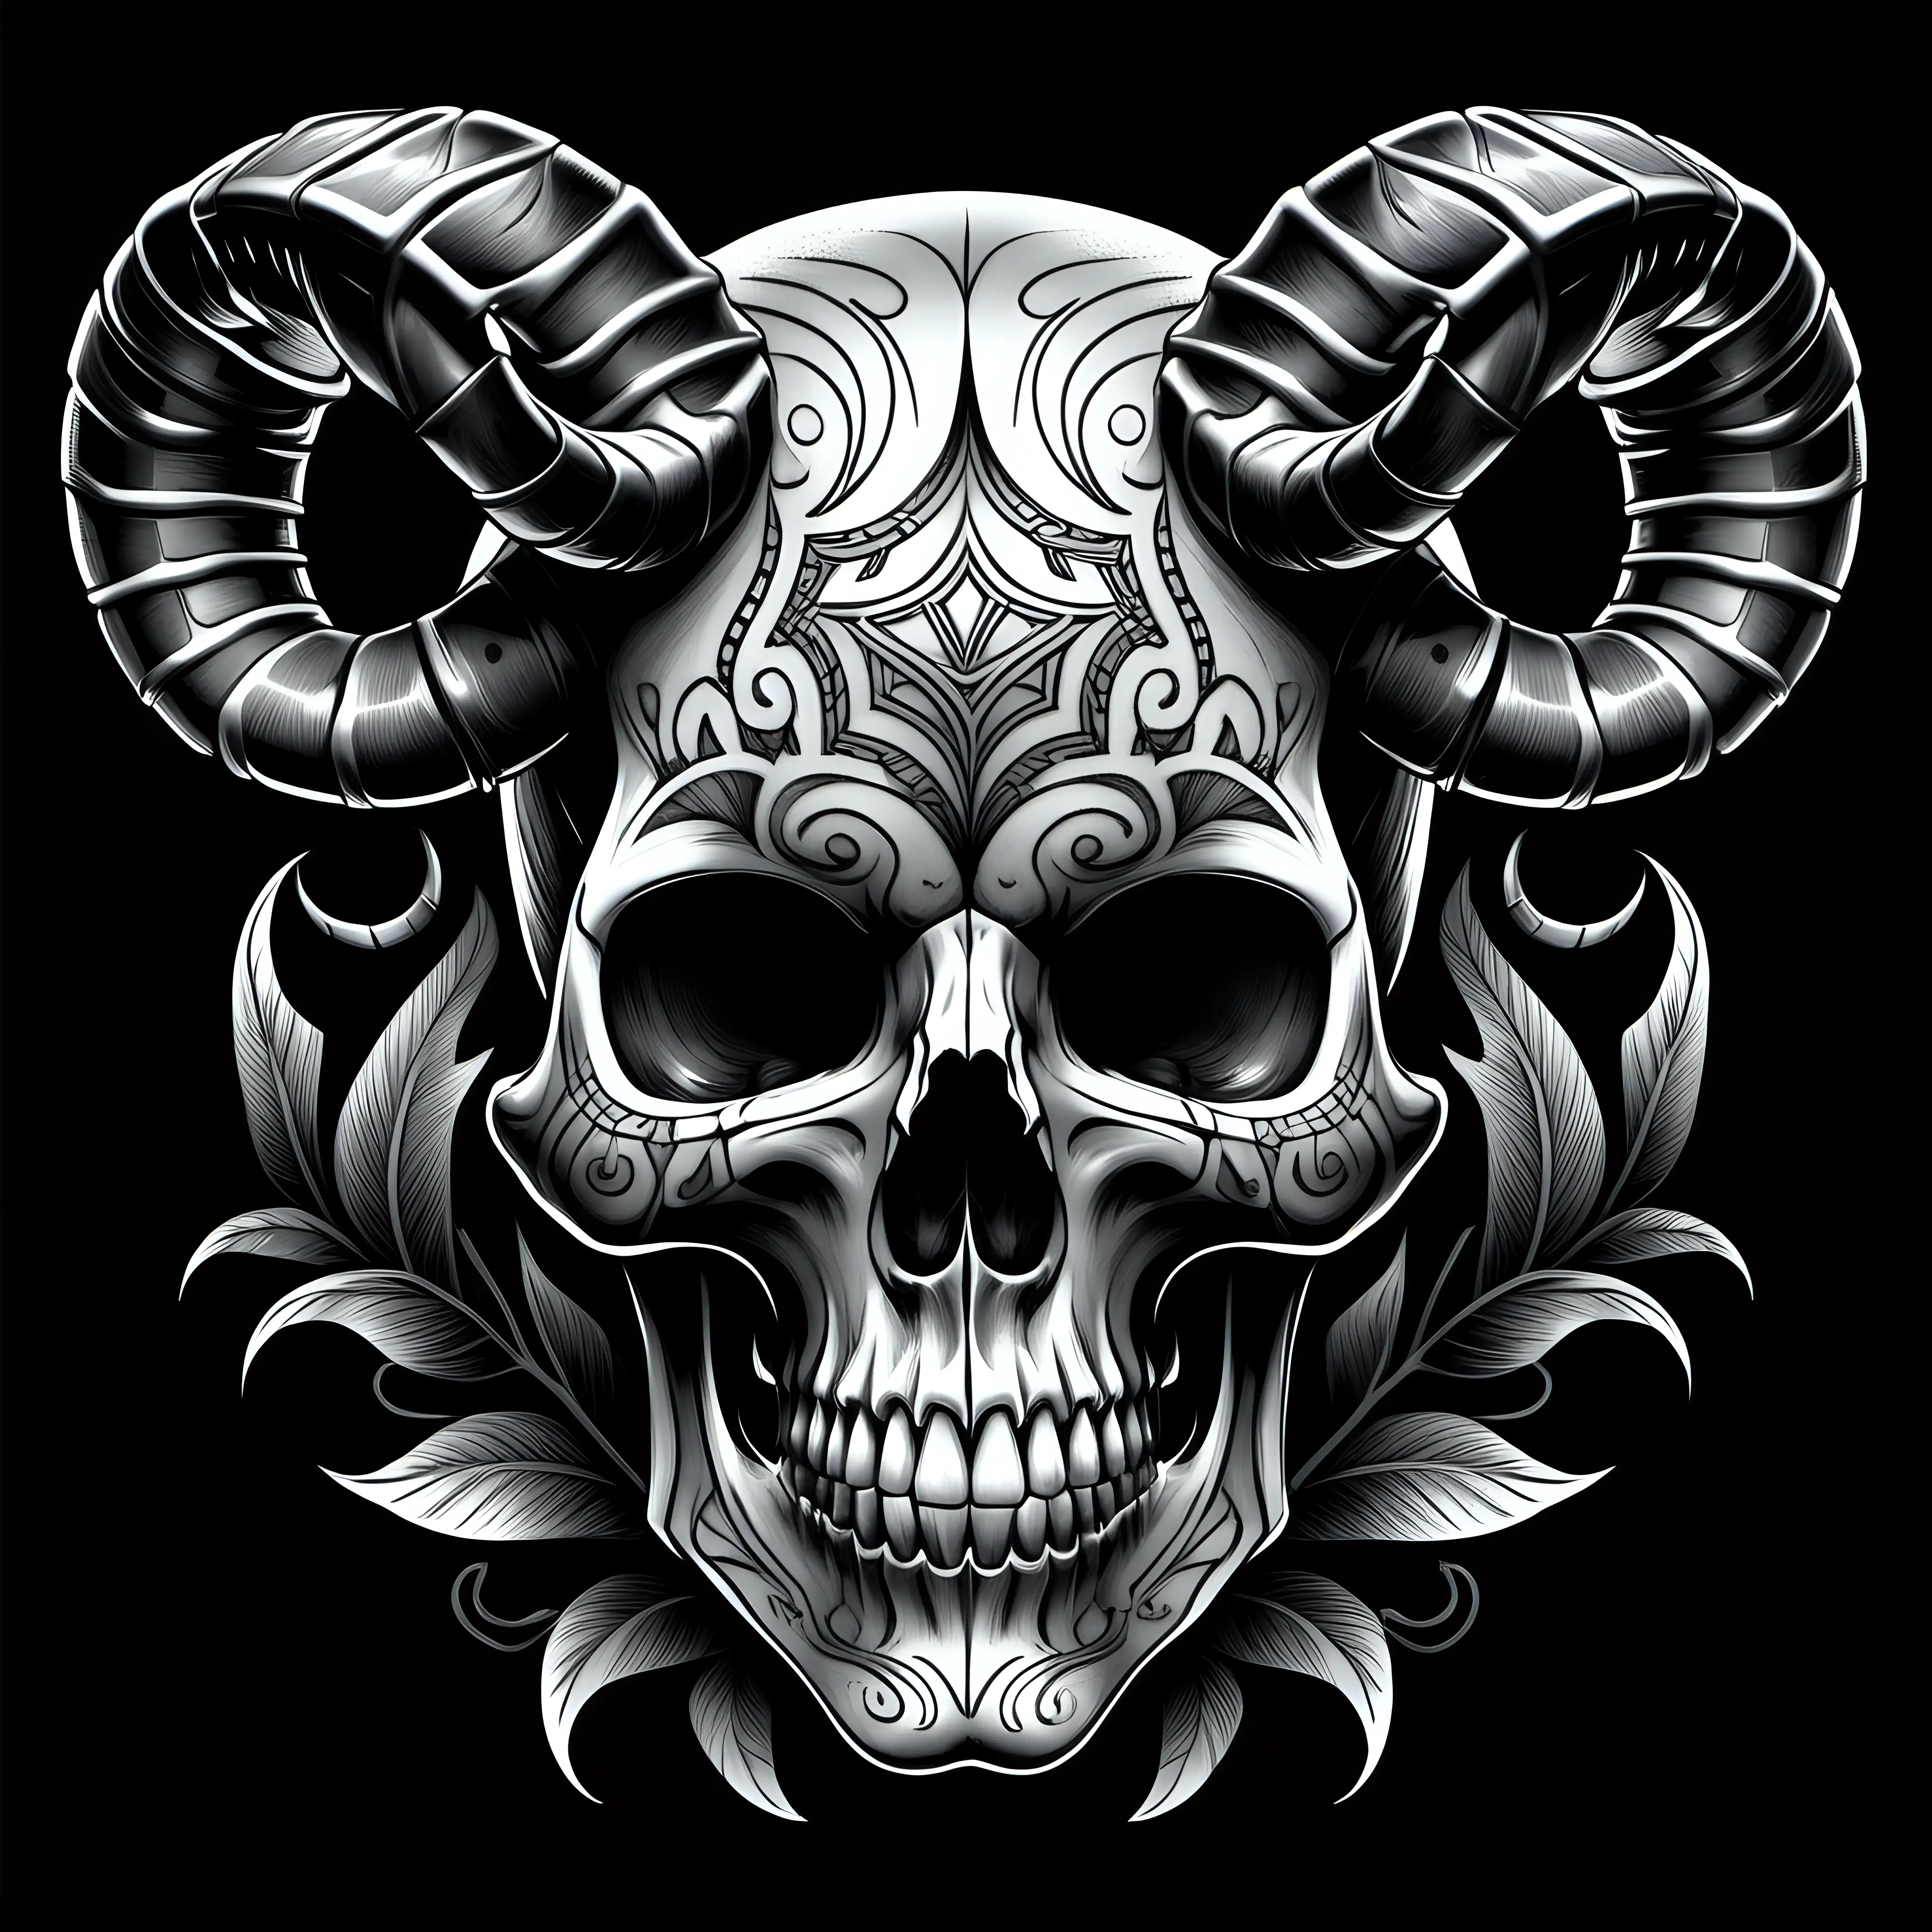 Mystique and Strength Tattooed Female Skull with Curved Horns on Black Background